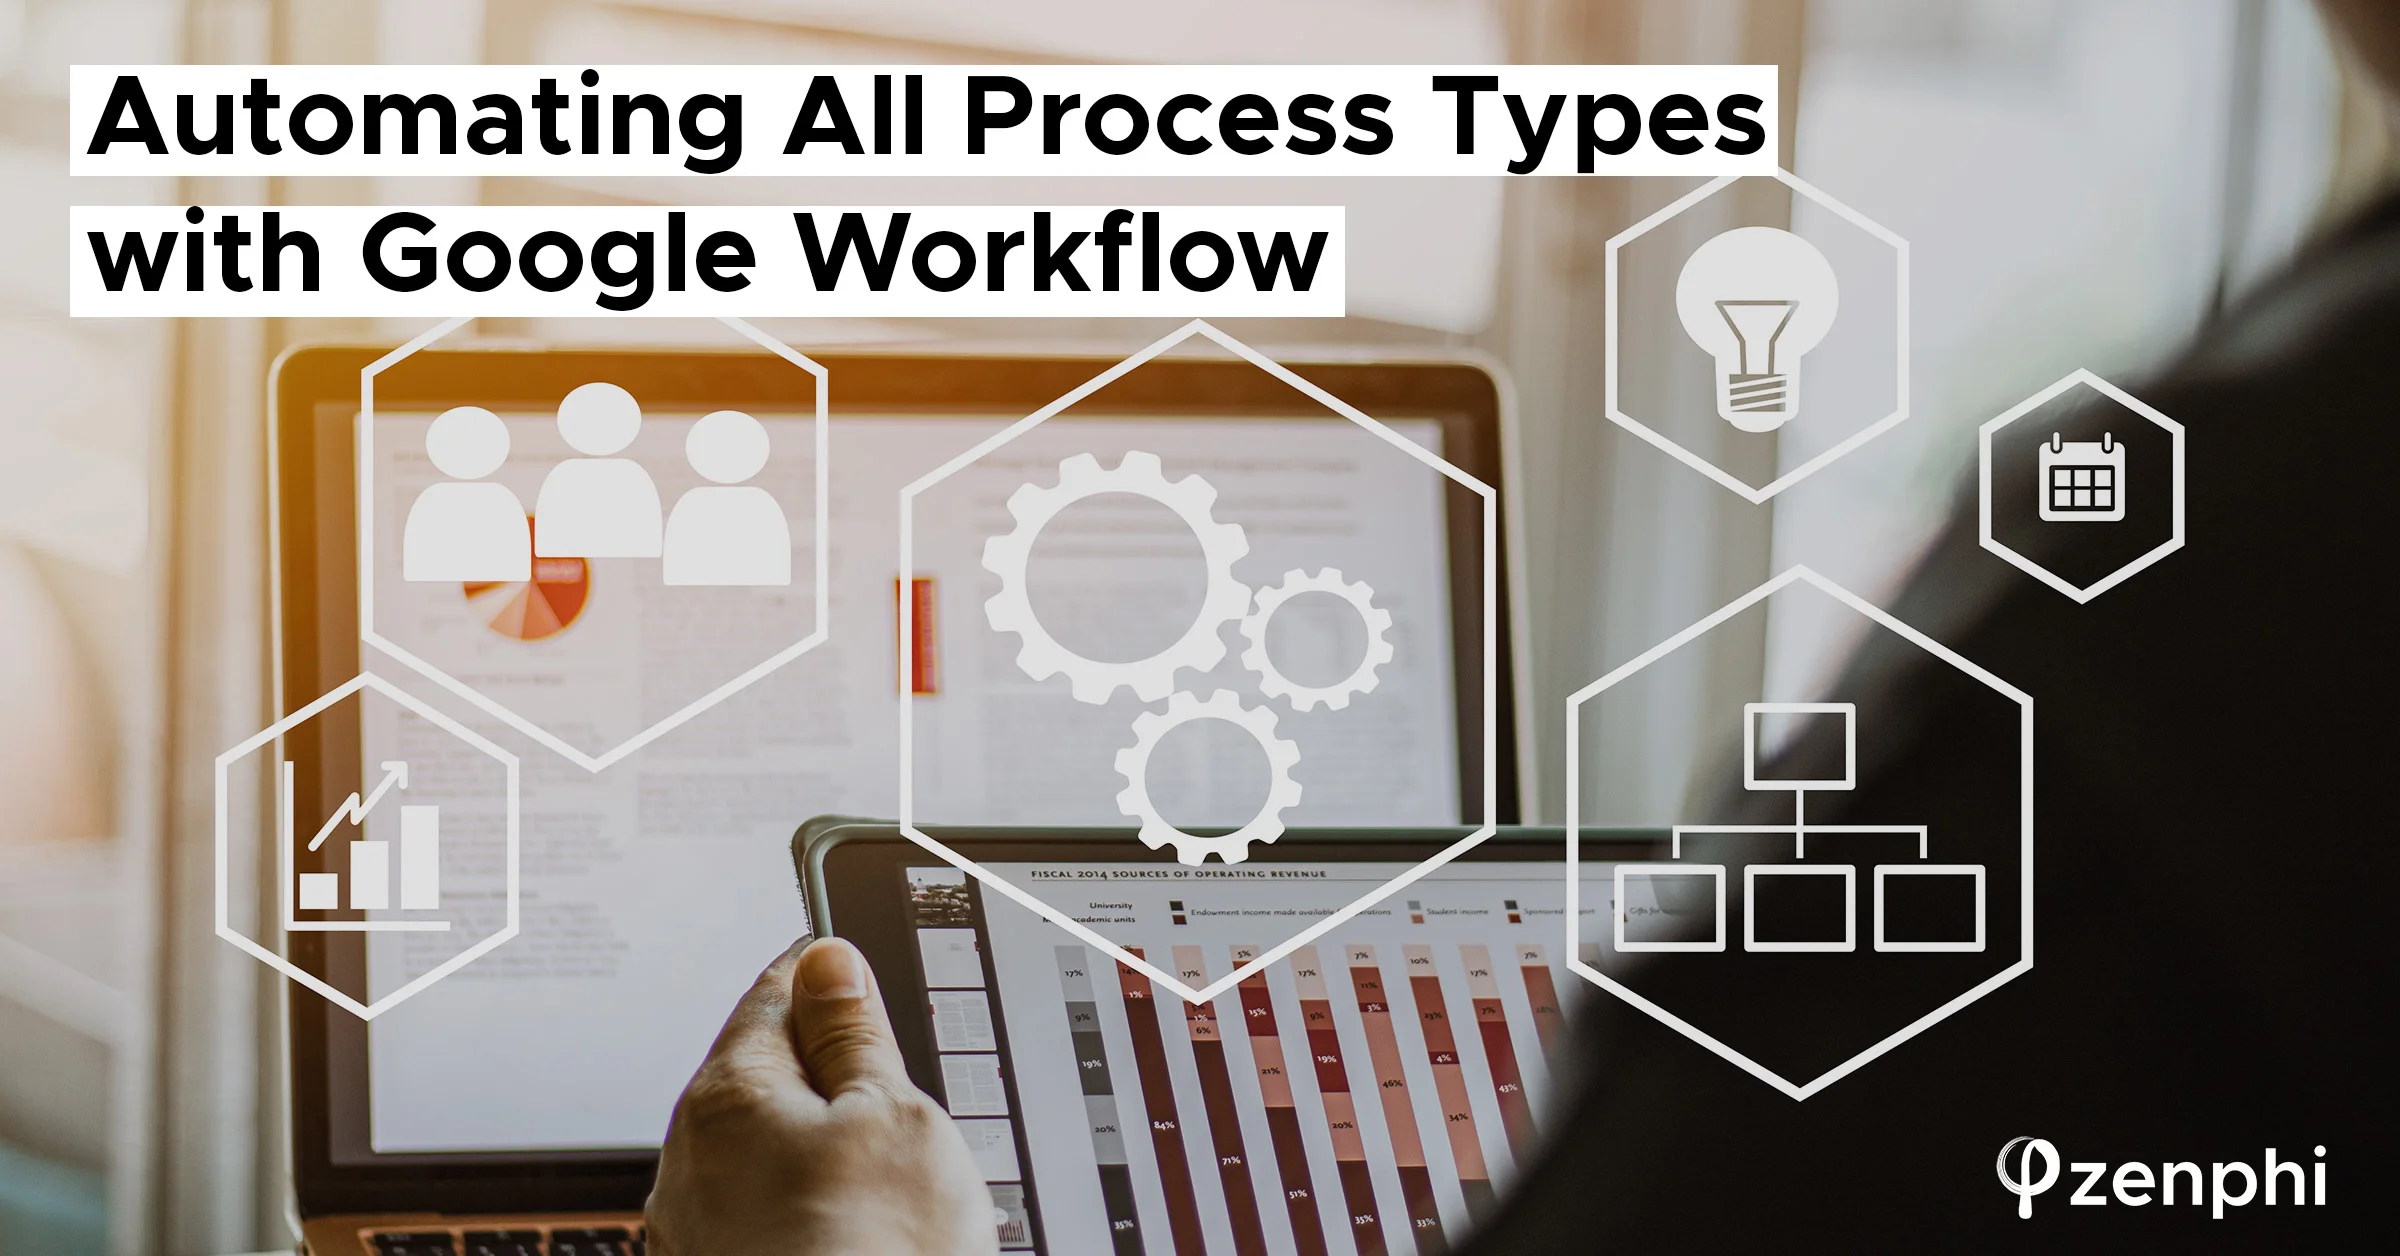 Automating All Process Types with Google Workflow